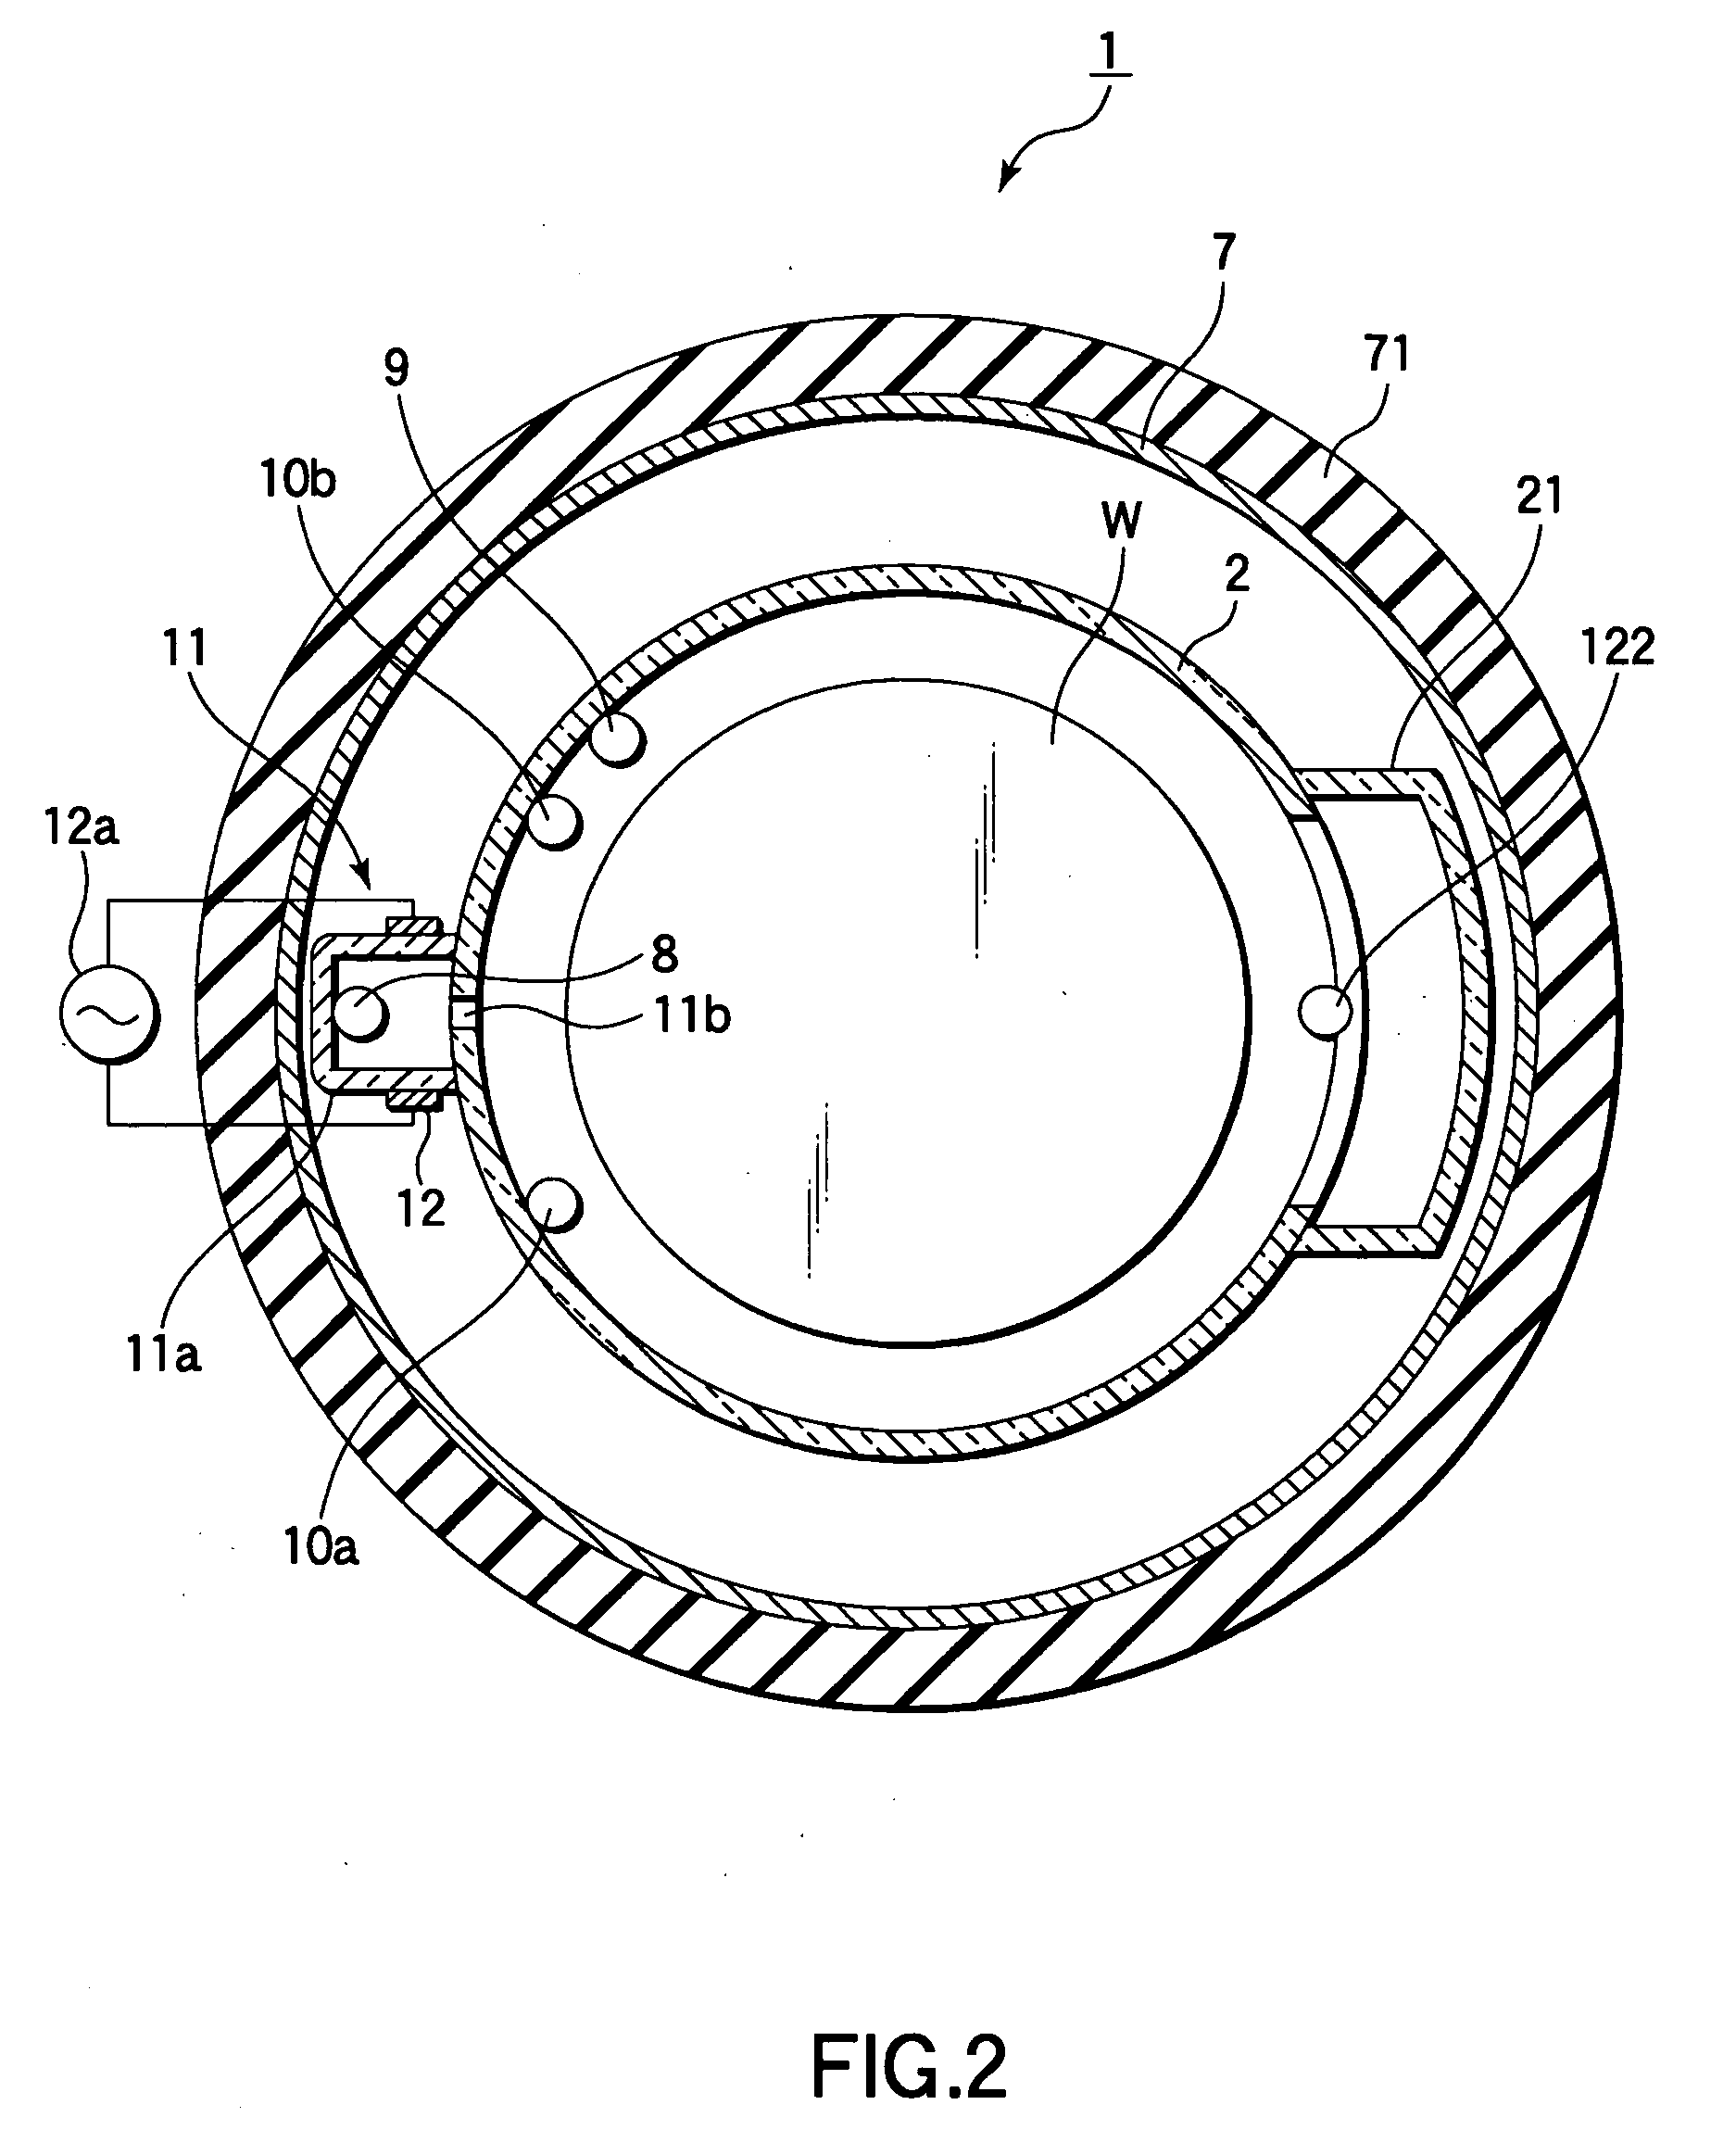 Film formation apparatus for semiconductor process